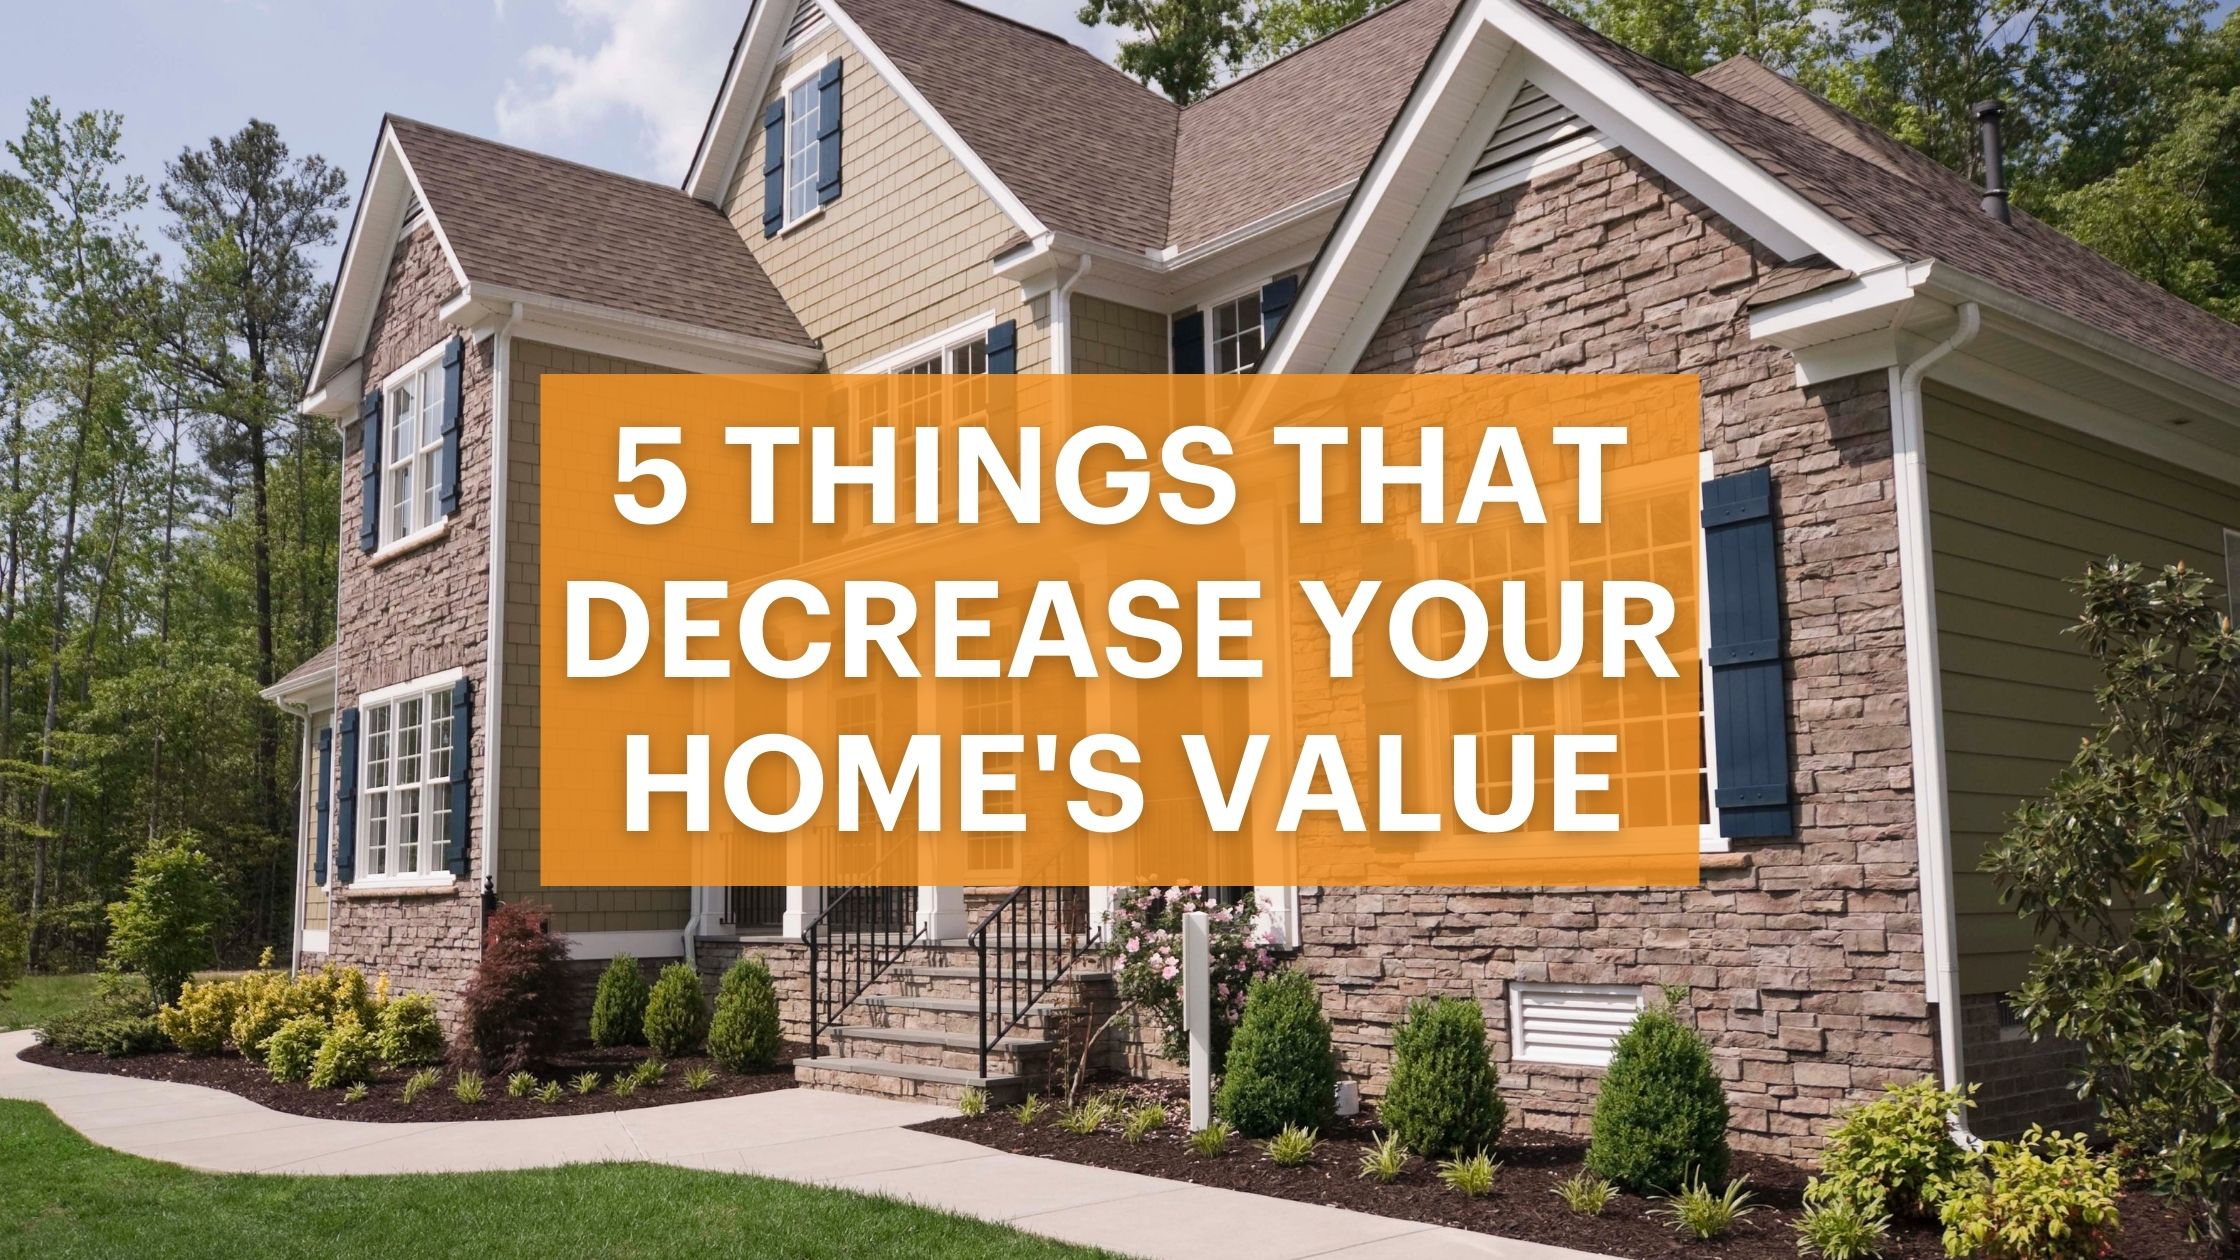 5 Things That Decrease Your Home’s Value